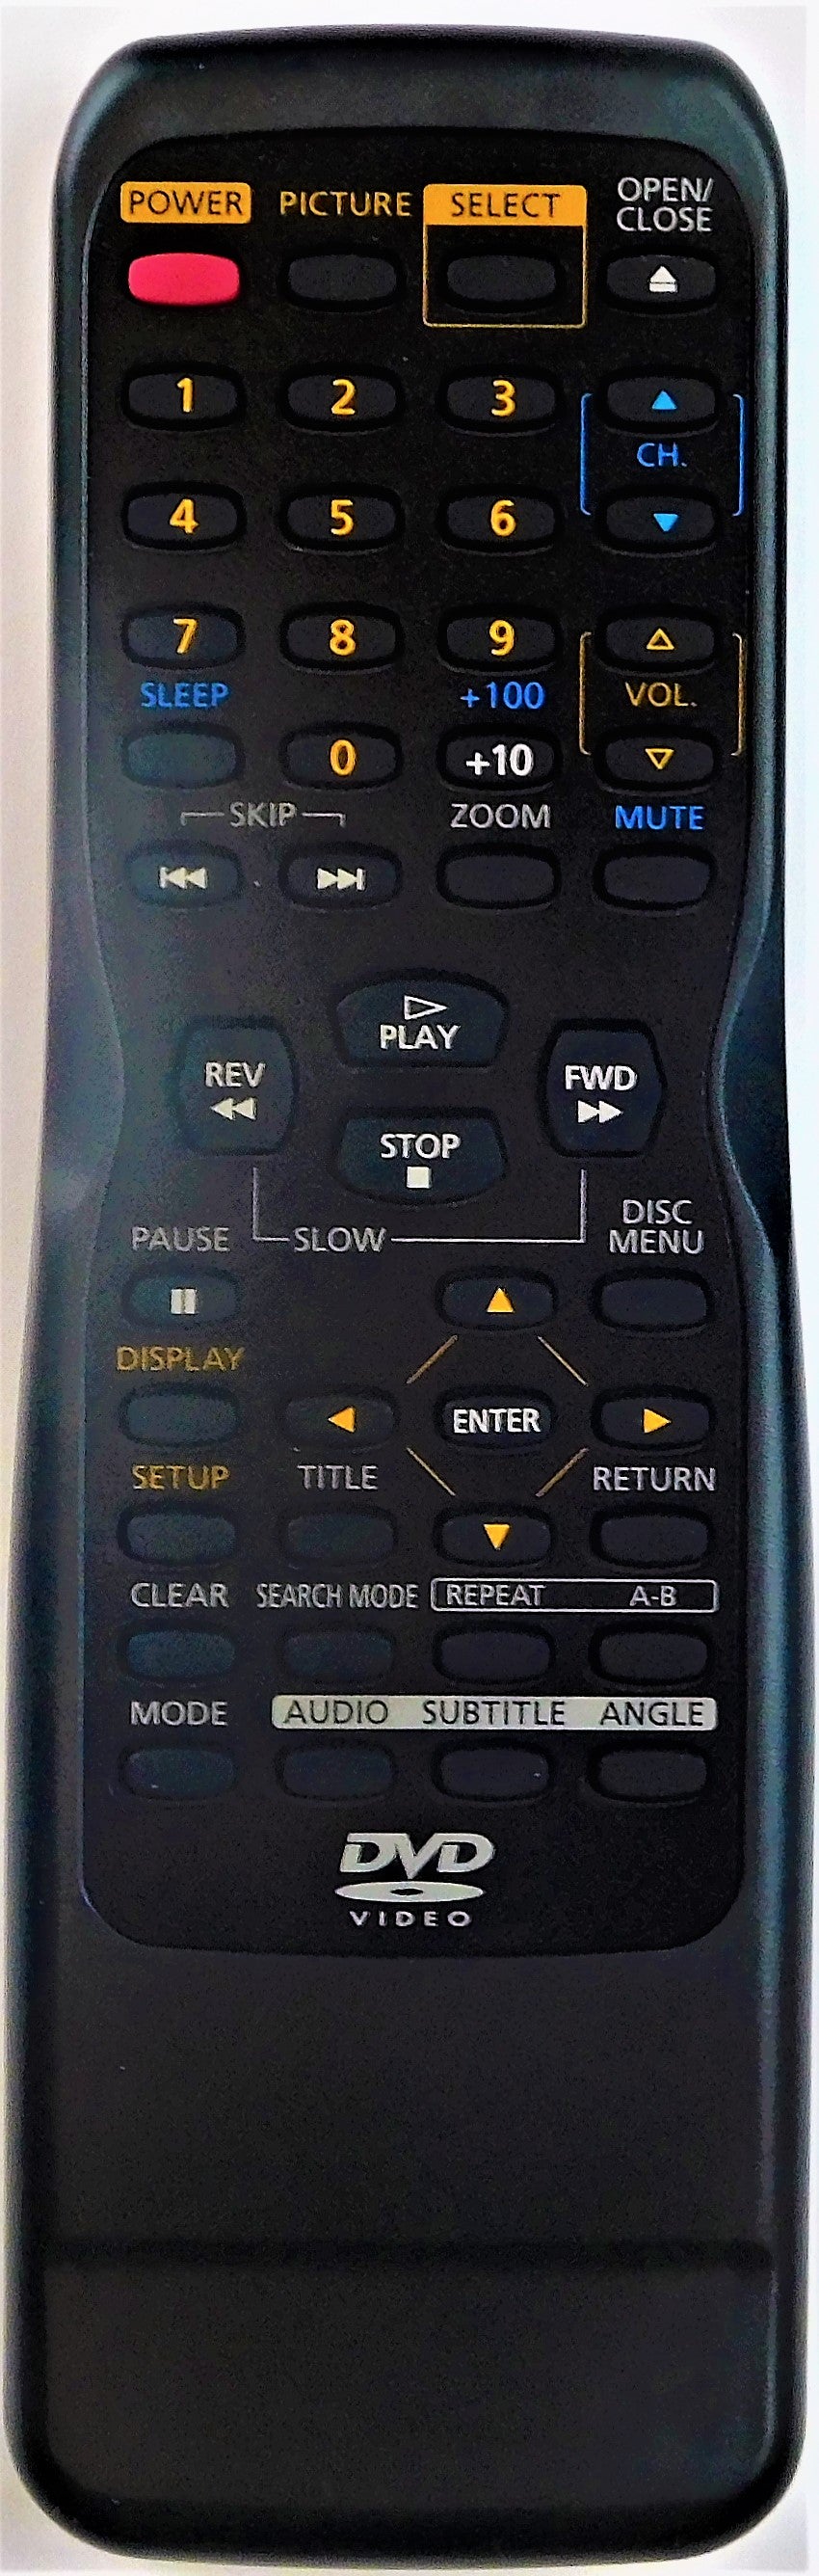 OEM replacement remote control for Durabrand, Emerson, SV2000, Sylvania, Symphonic CRT TV & DVD COMBOs NE218UD